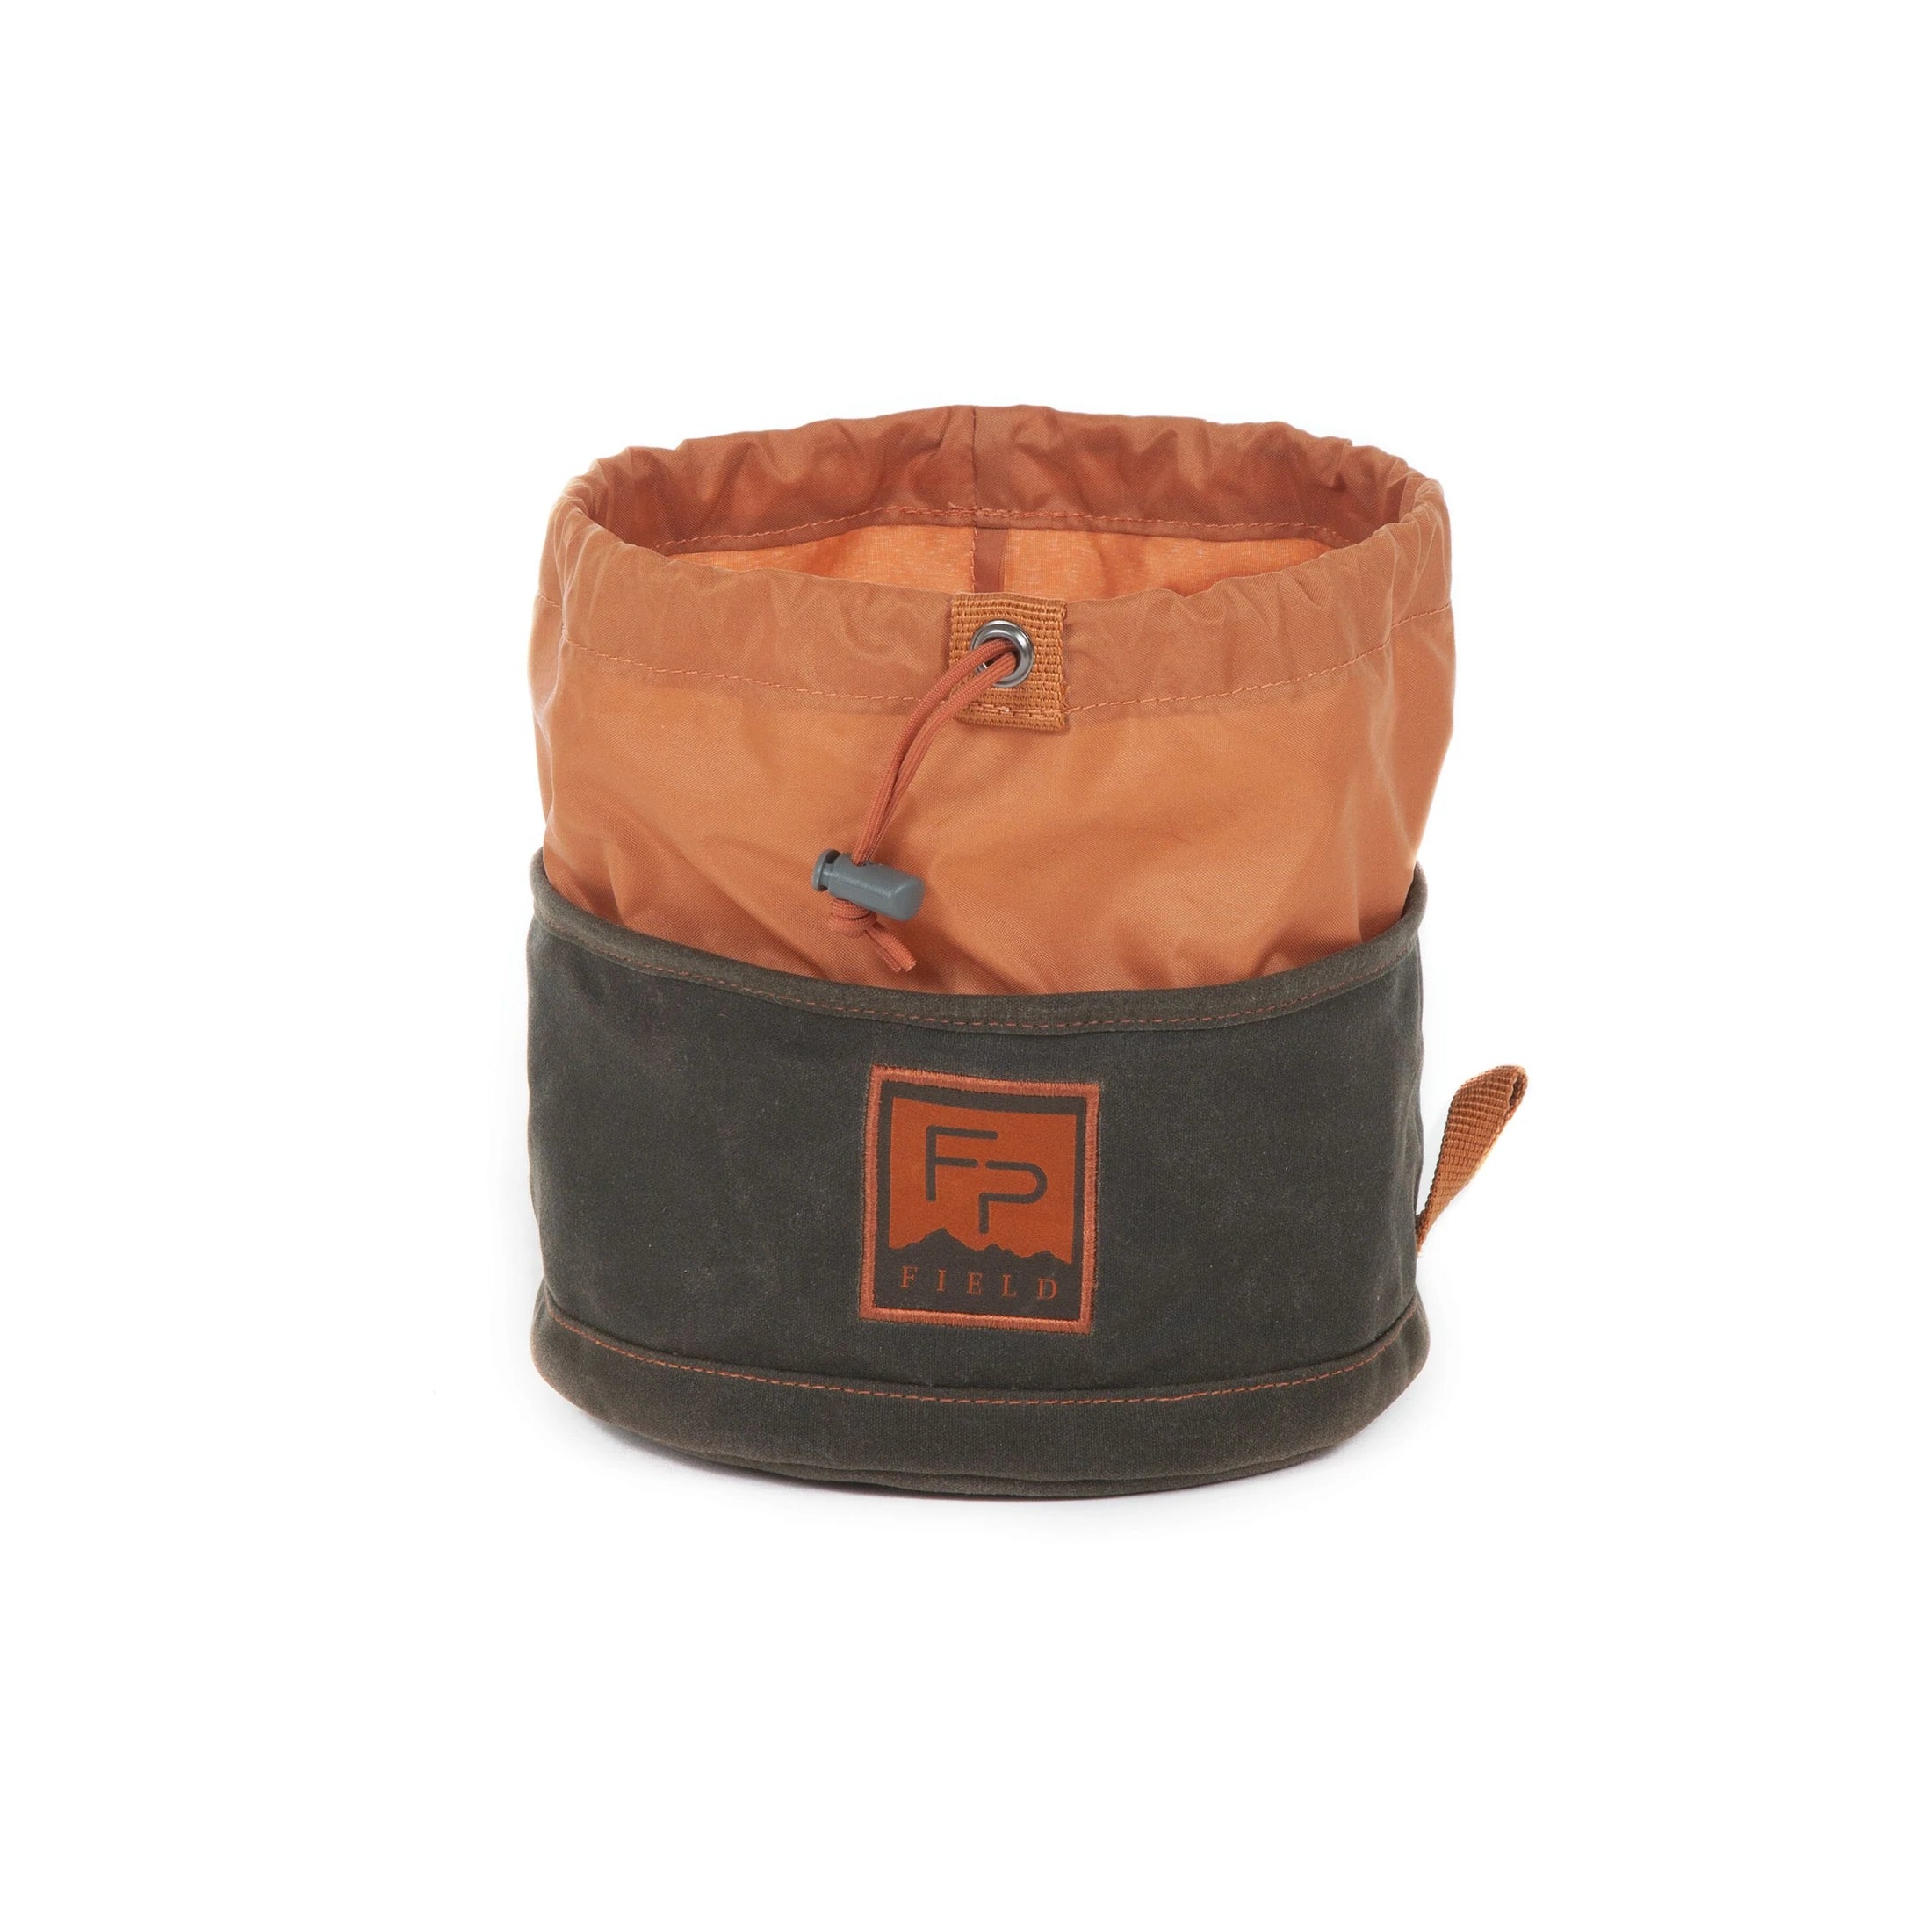 Fishpond Bow Wow Travel Food bowl